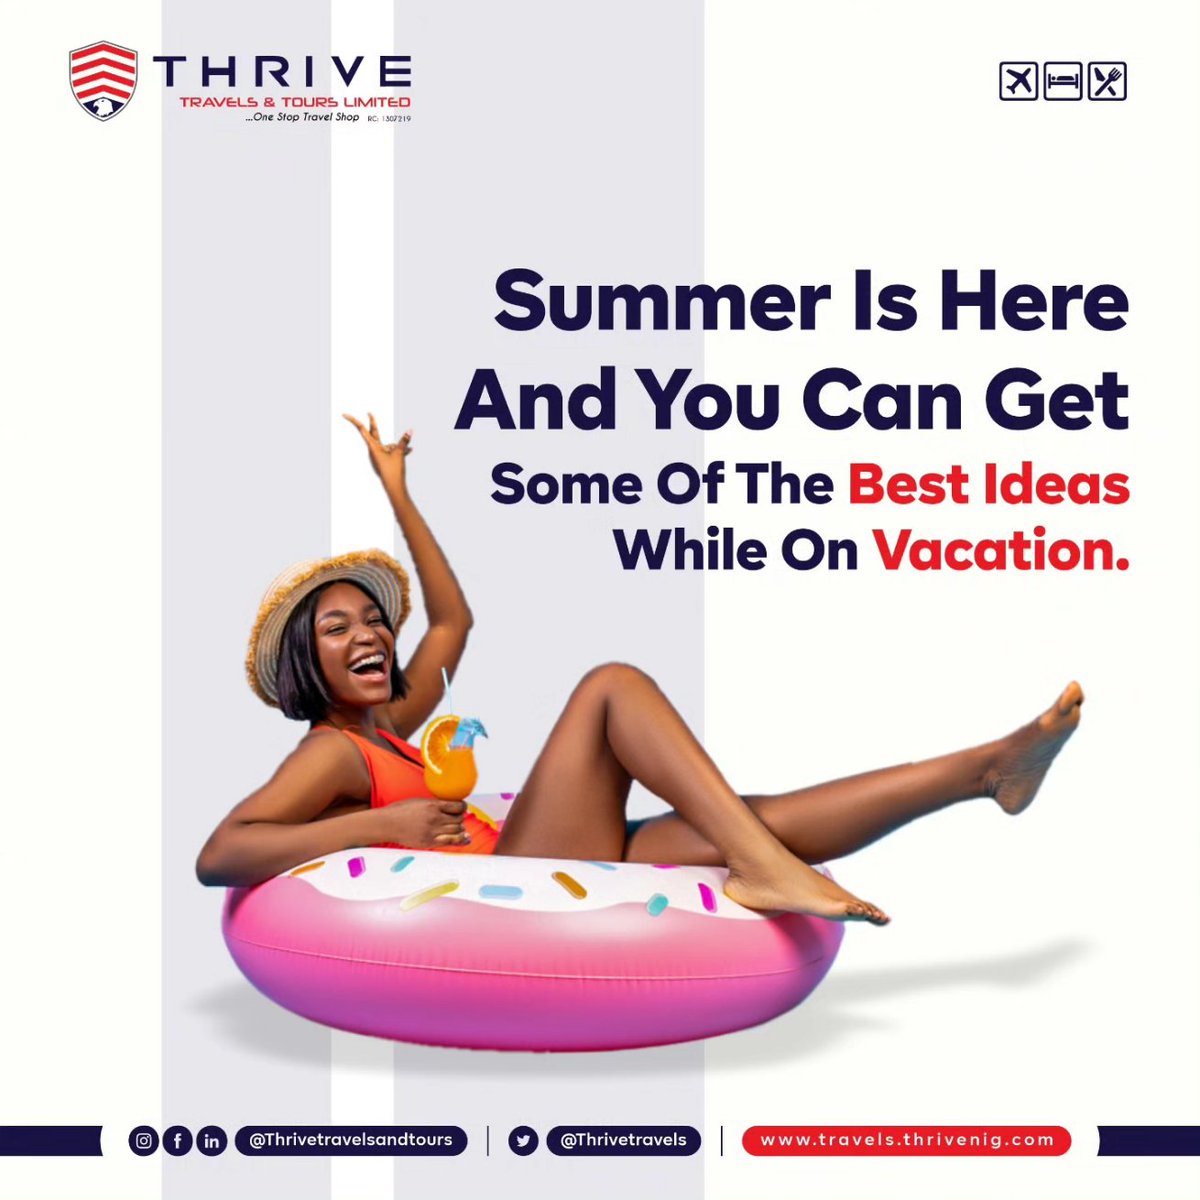 Did you know that some of the best ideas are gotten while you are relaxed and on vacation?

Well, summer is here. Utilize our travel deals and explore as much as you want.
.
#summer #summerdeals #ideas #vacation #vacationplans #thrivetravelsandtours